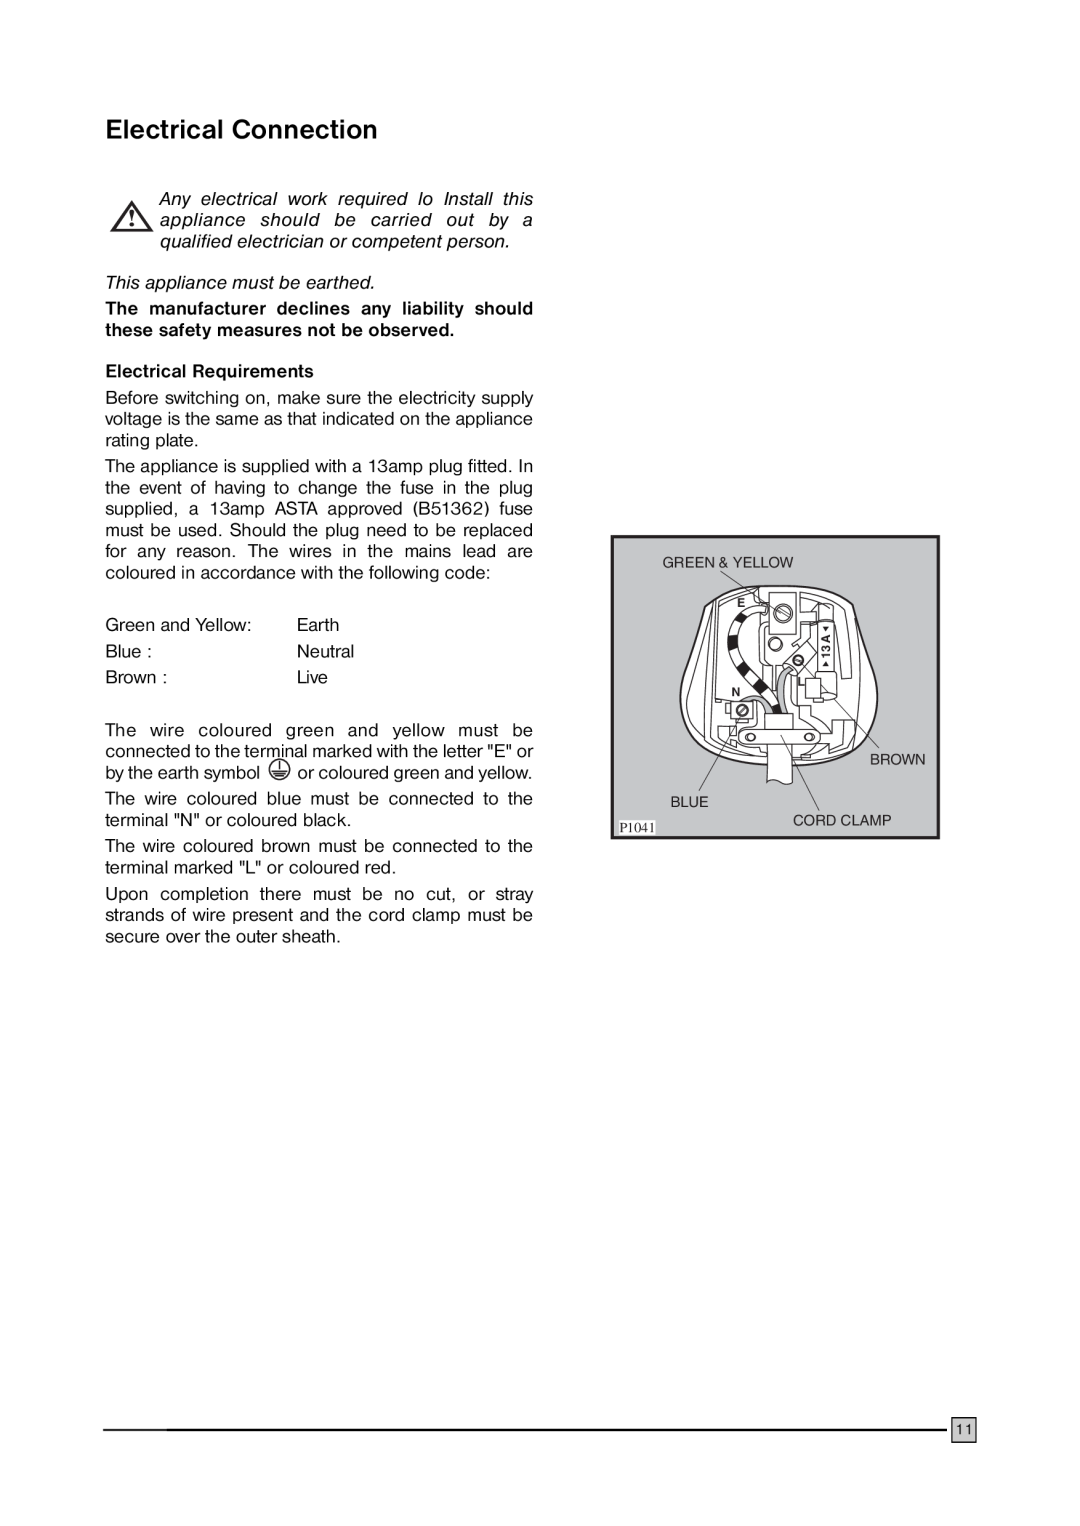 Zanussi ZFC 35C installation manual Electrical Connection, Electrical Requirements 